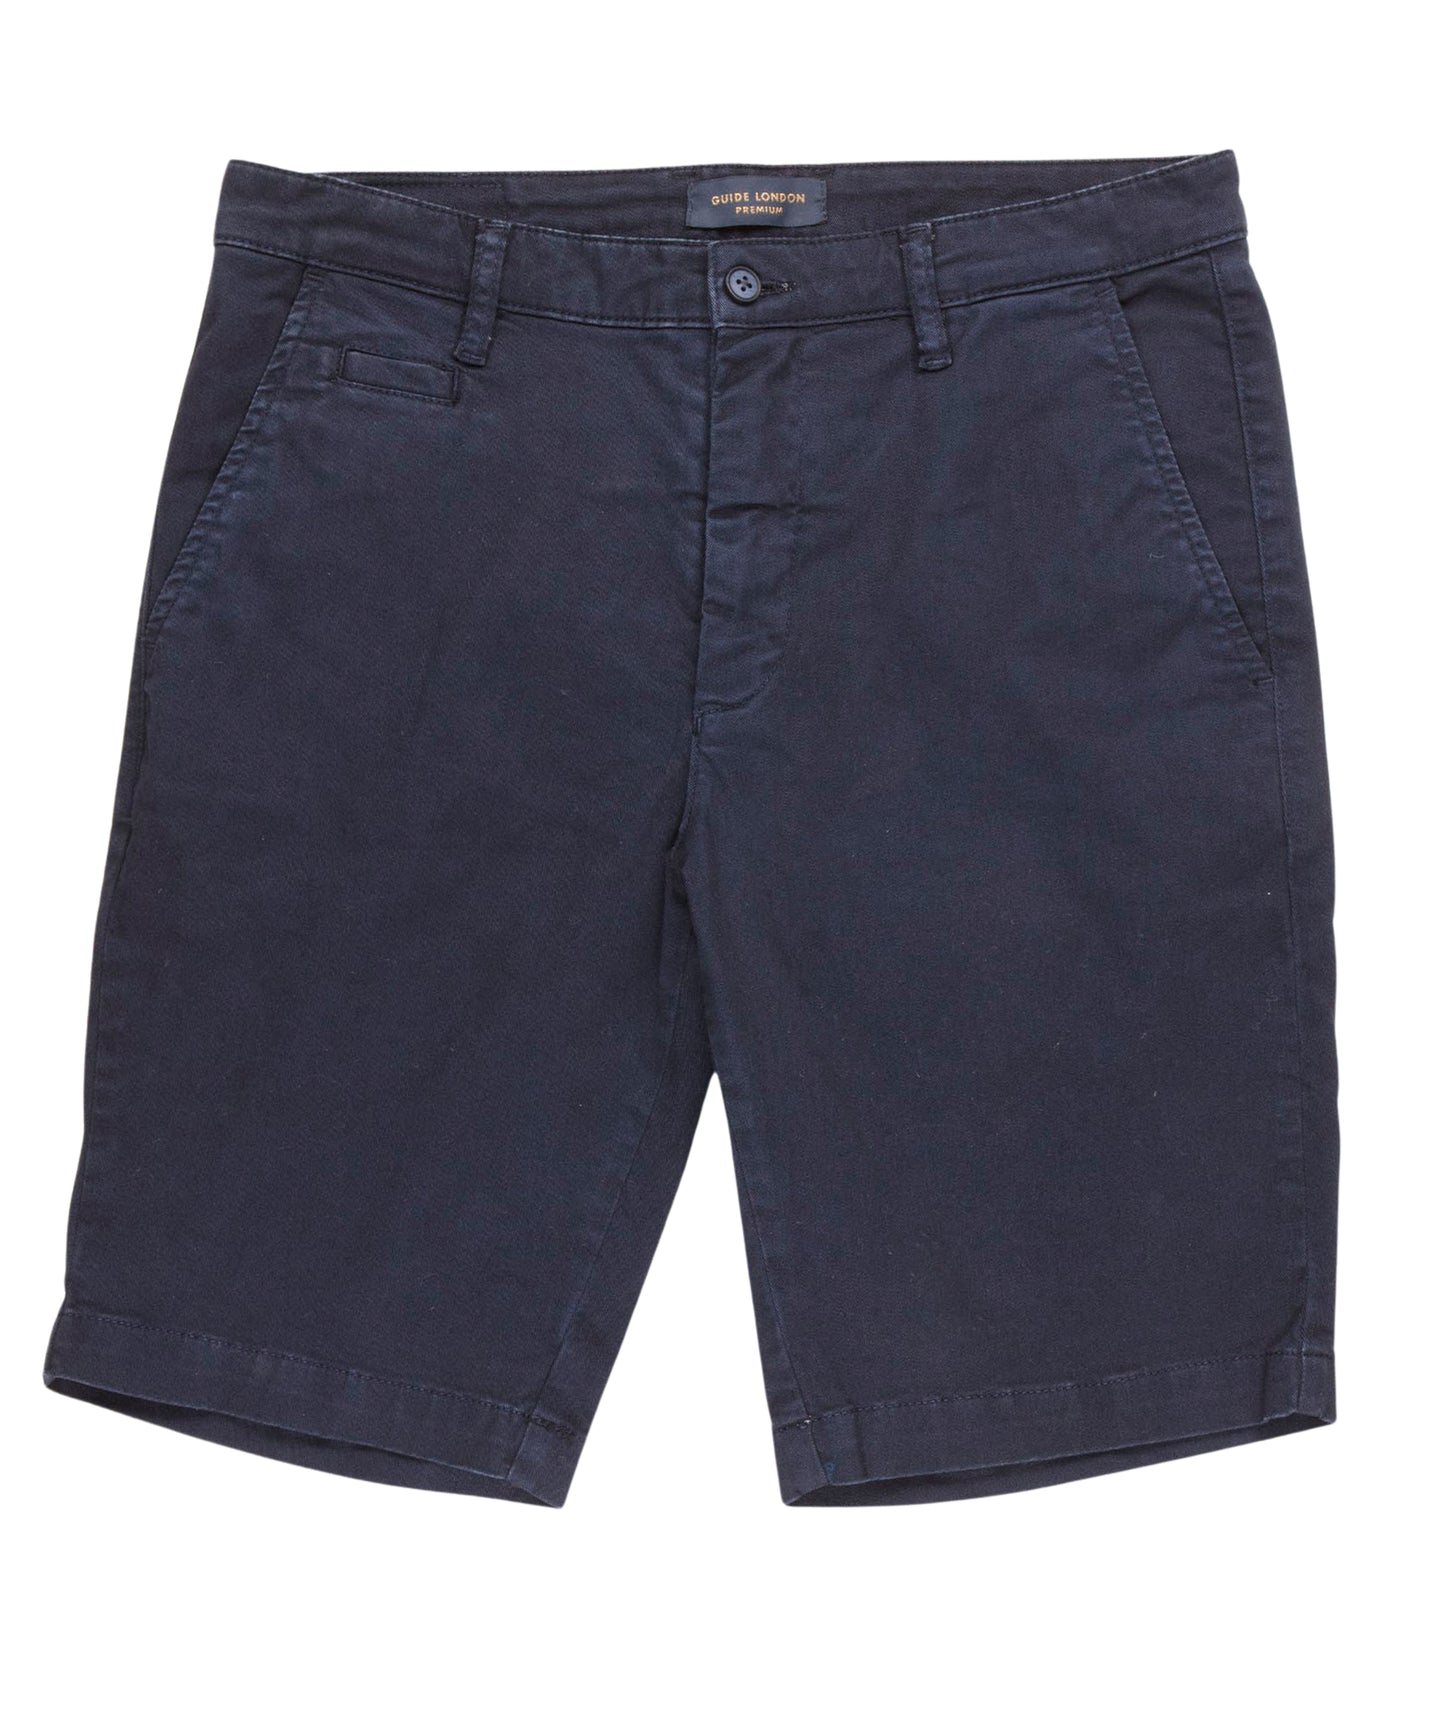 Guide Tr 1682 Shorts